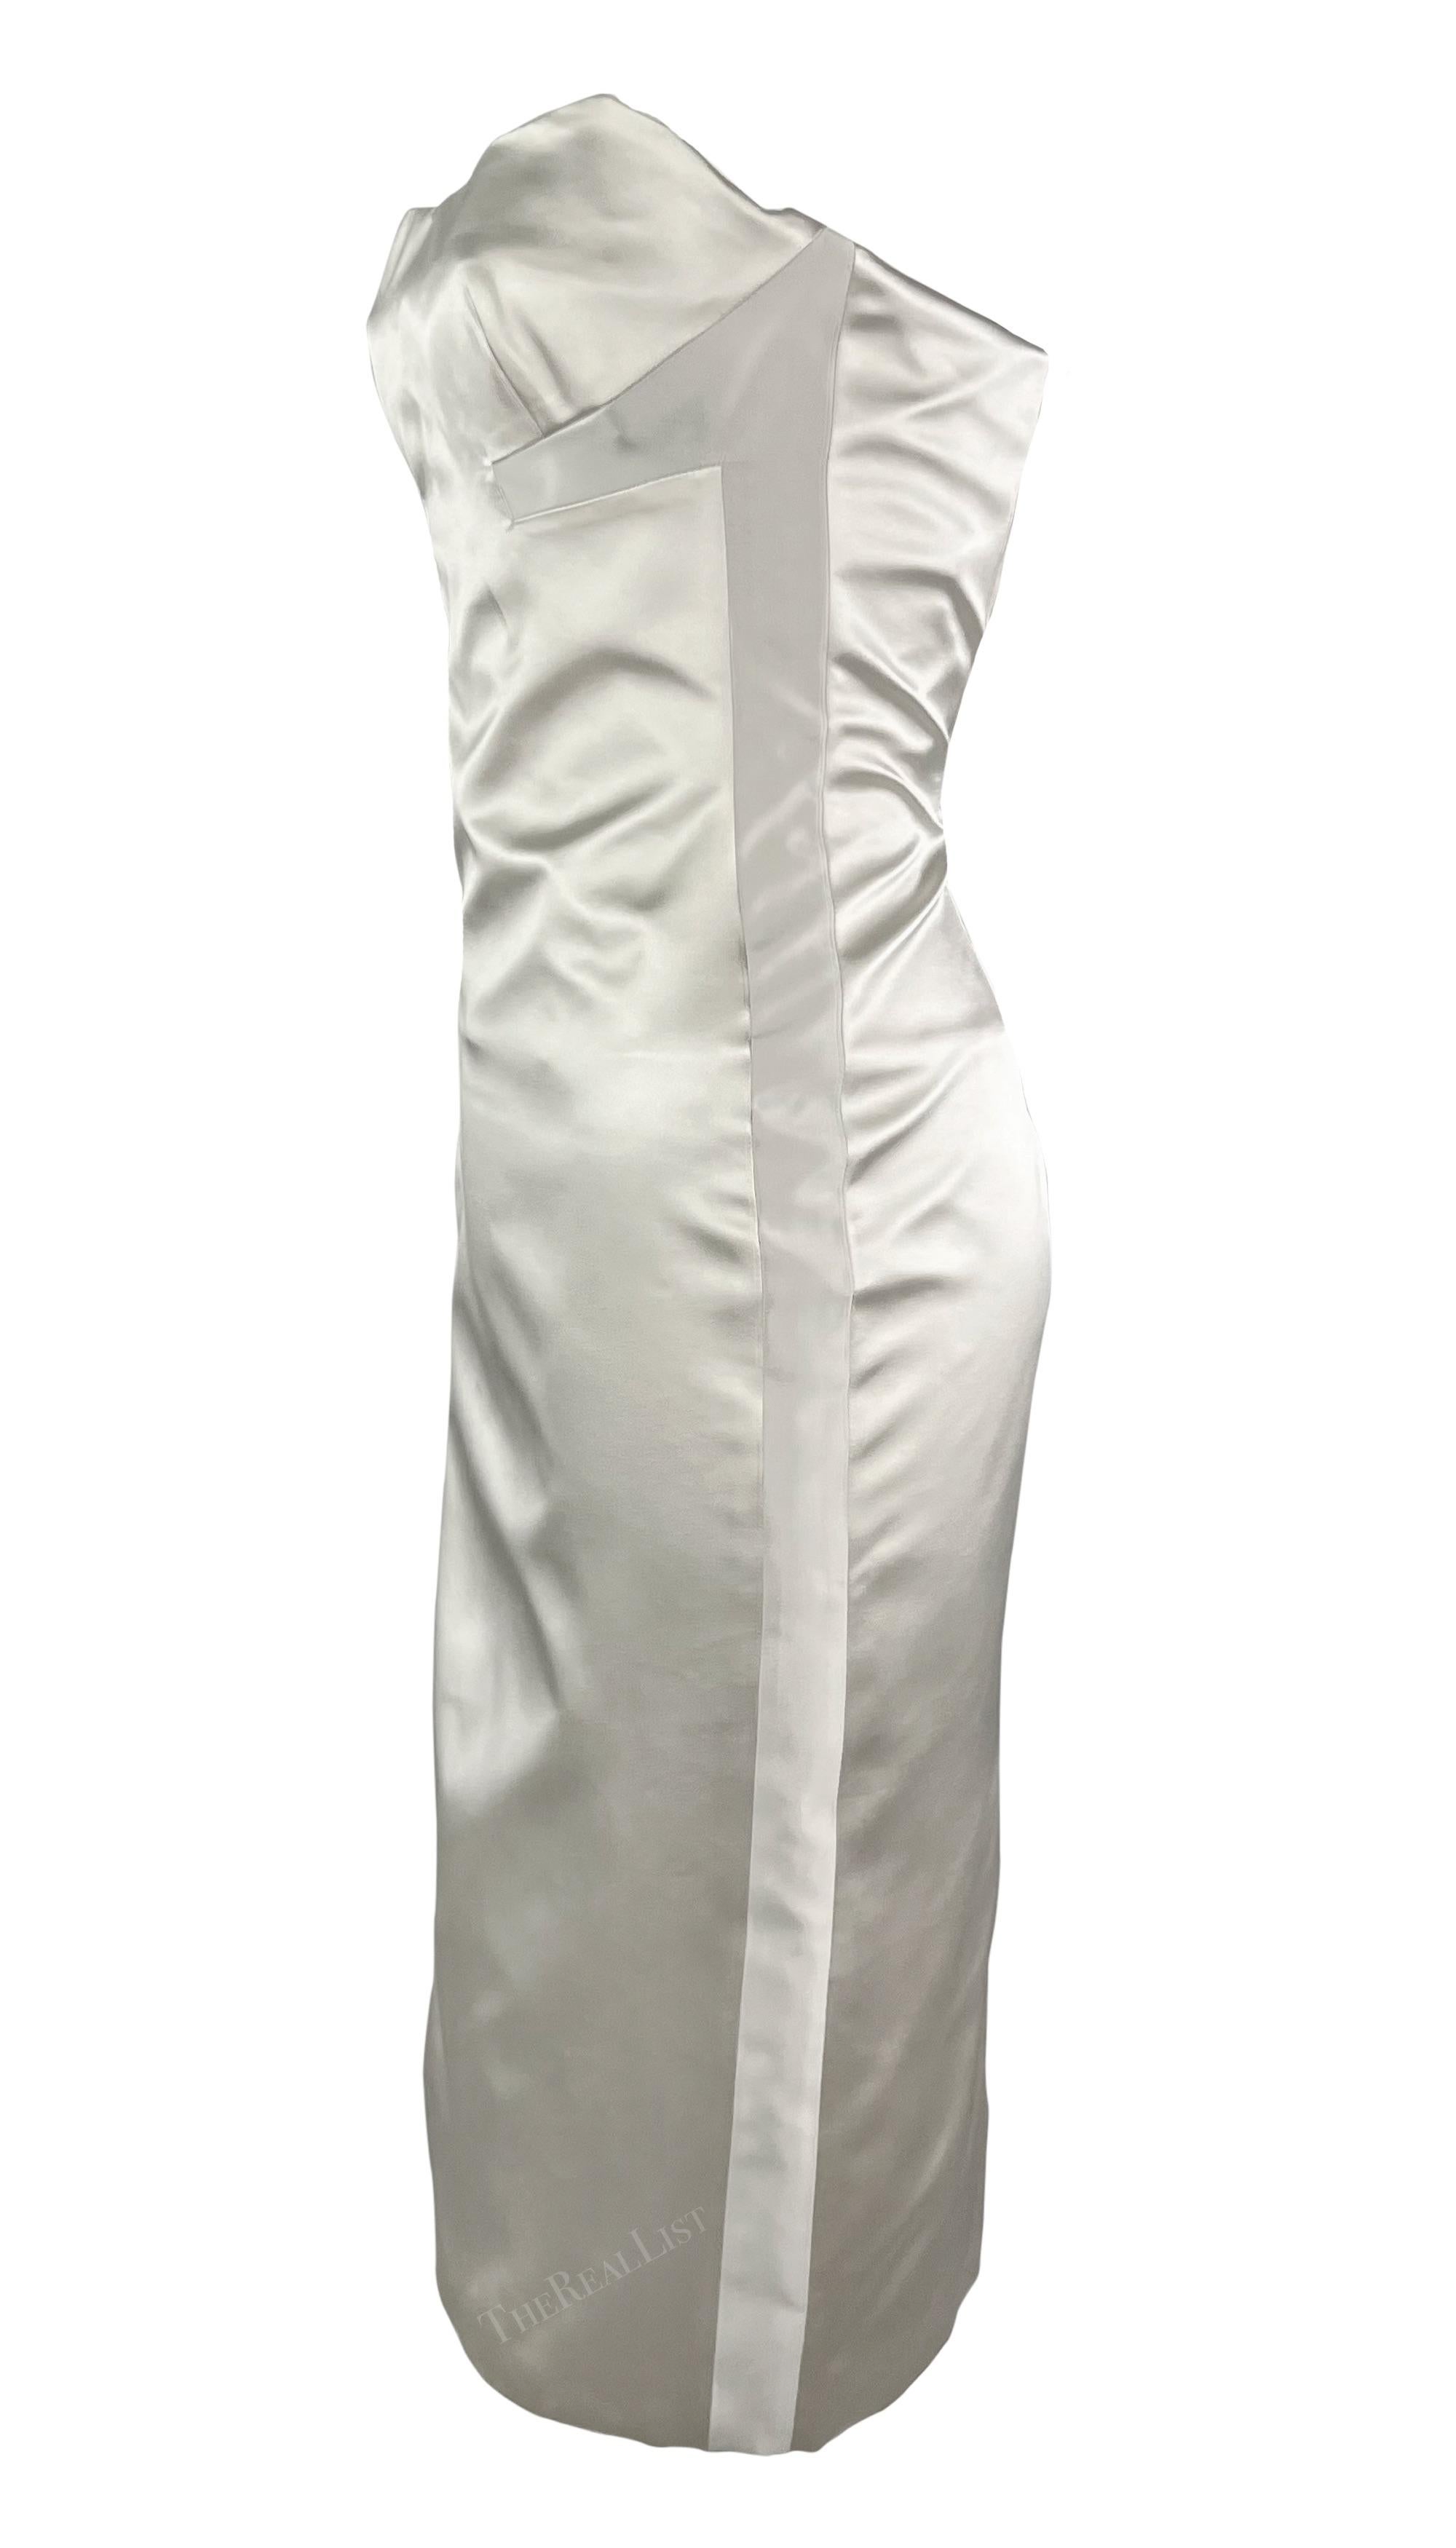 NWT S/S 2001 Gucci by Tom Ford Runway Ad Corset White Silk Satin Strapless Dress For Sale 7